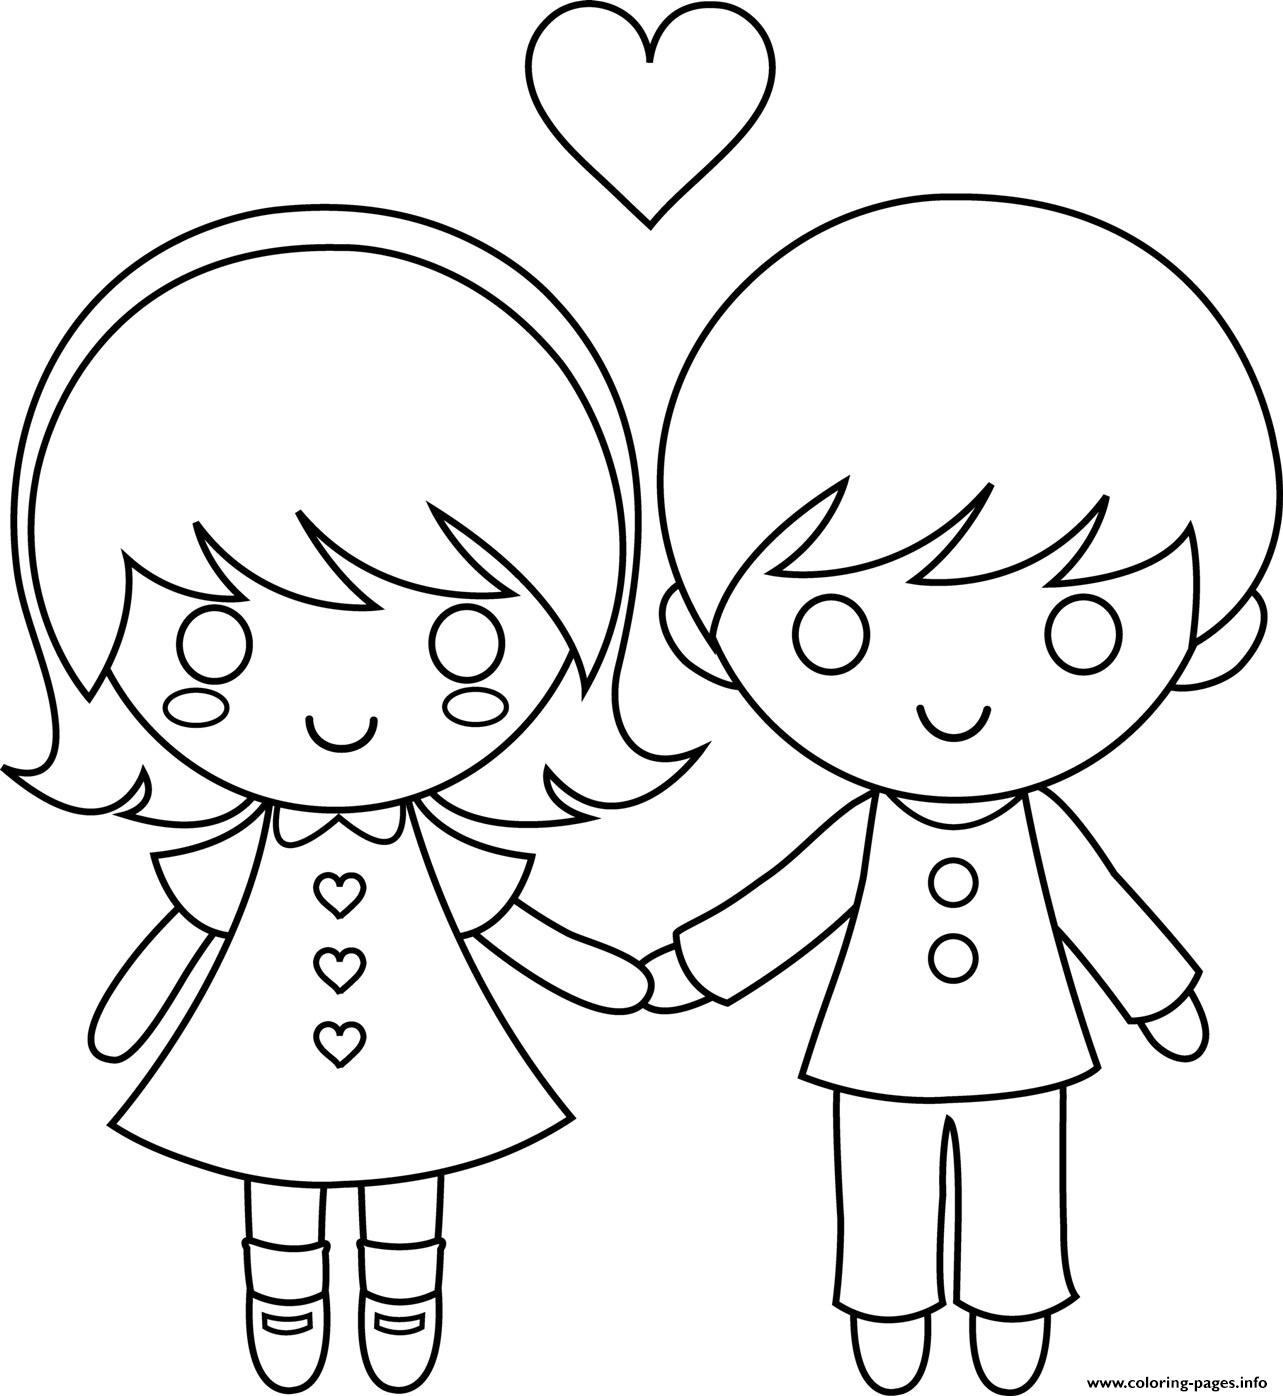 Kids Couple Valentine 6277 coloring pages